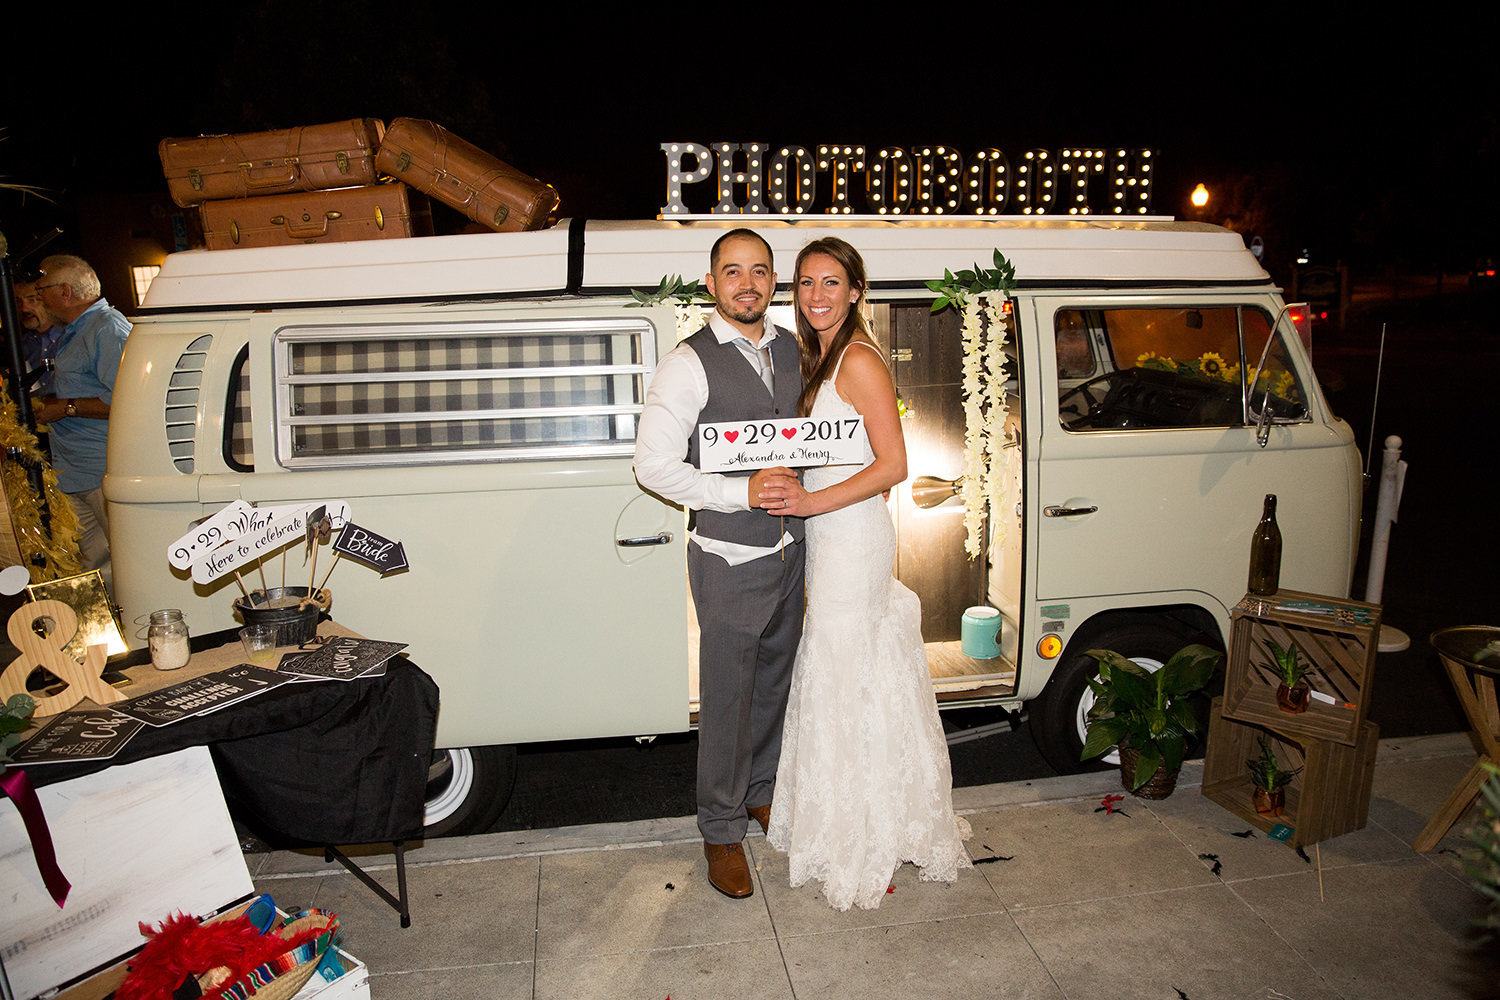 stunning night image with bride and groom at brick with vintage vw van